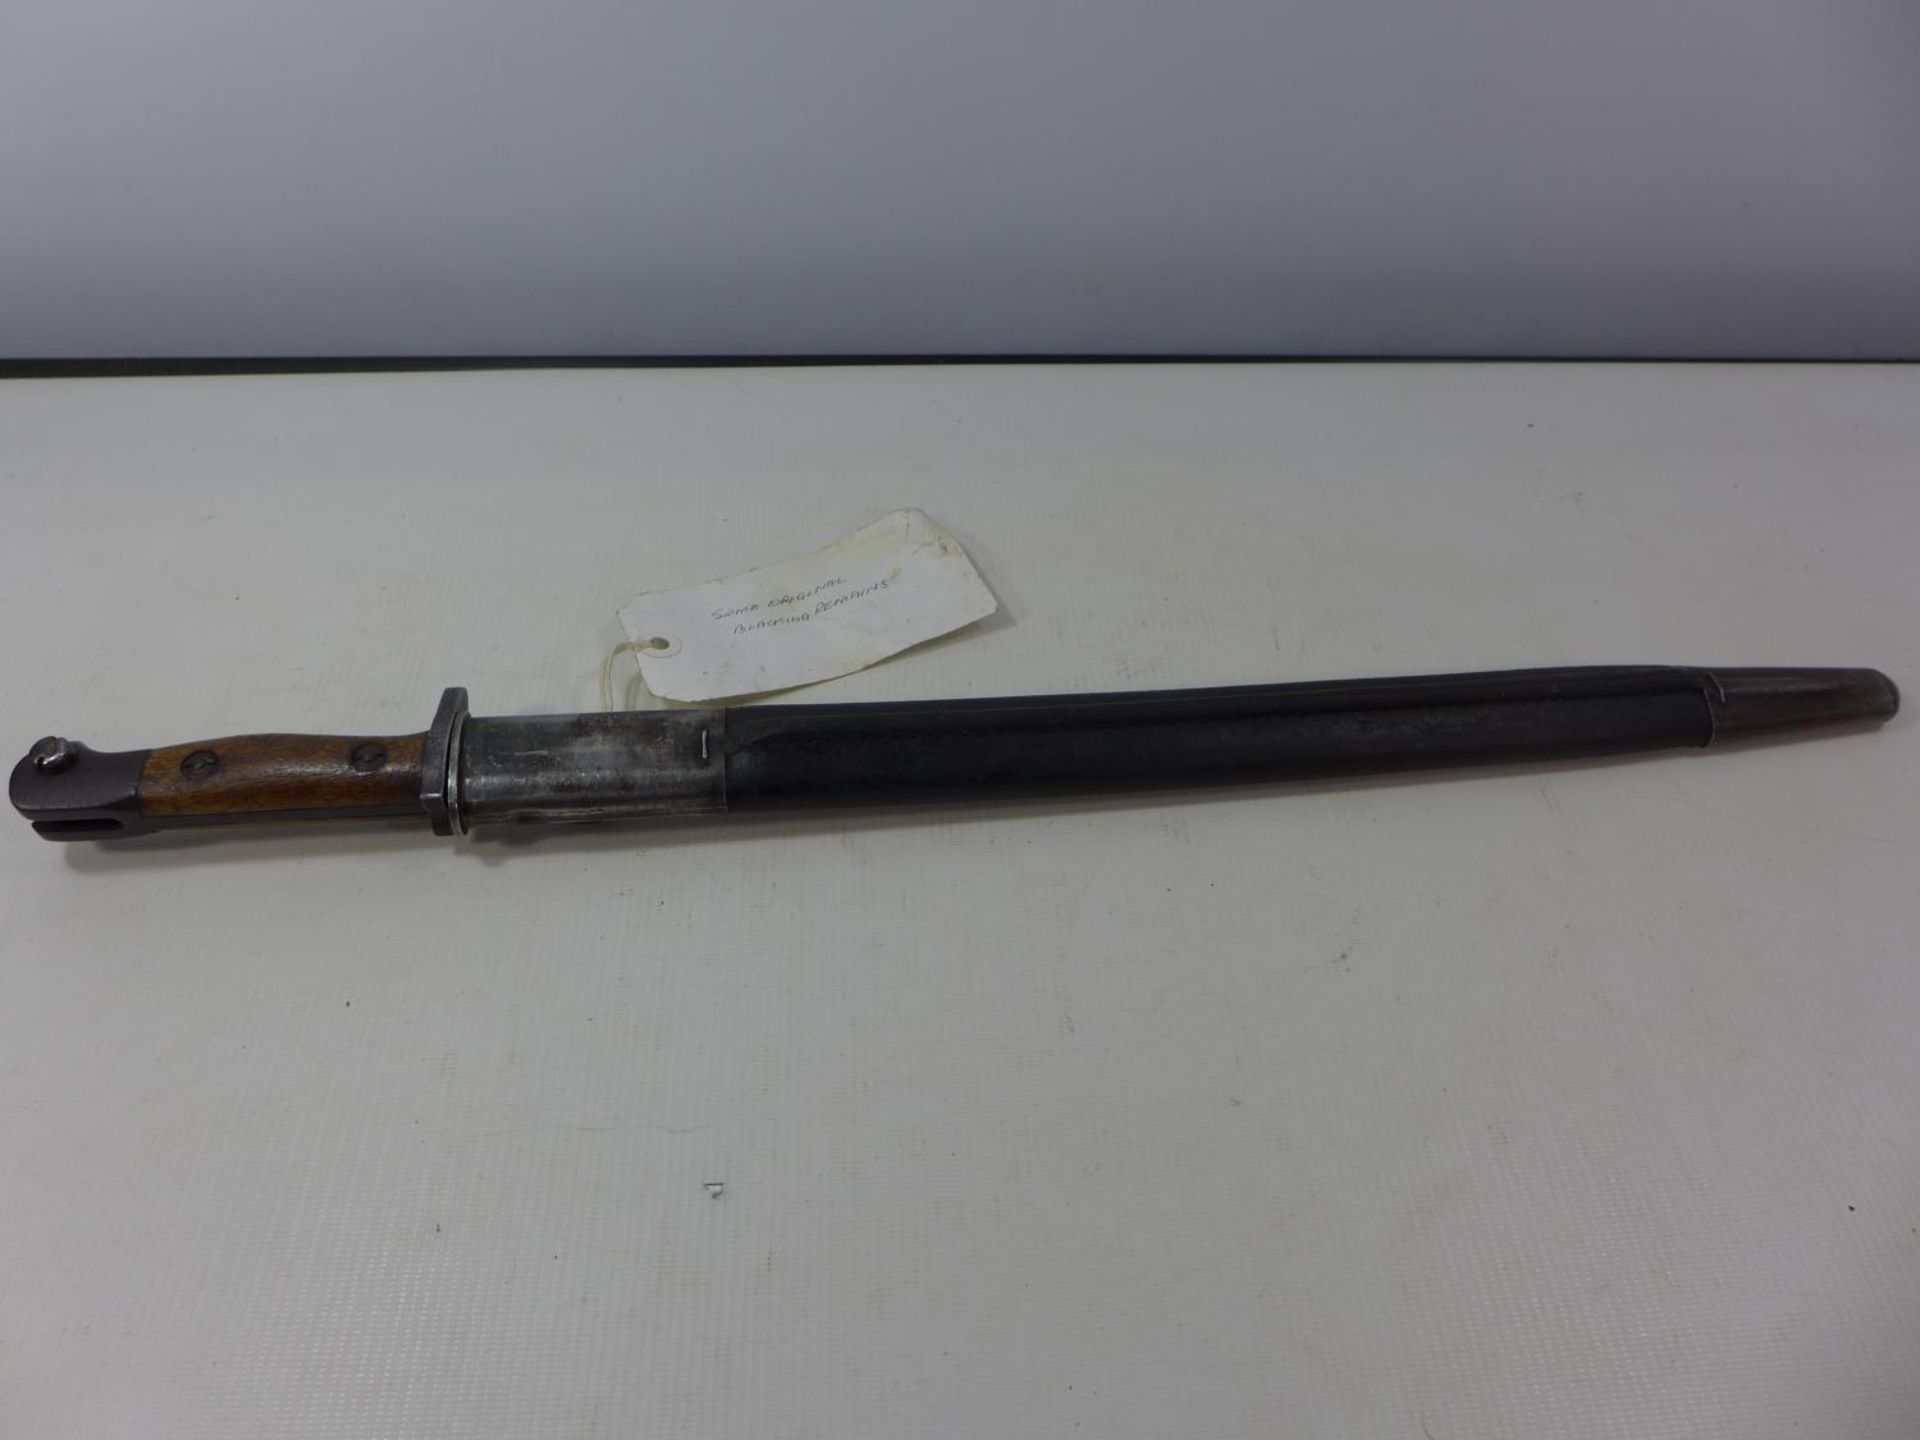 A RARE AUSTRALIAN LITHGOW P'07 BAYONET, 42CM BLADE, STEEL AND LEATHER SCABBARD - Image 4 of 5